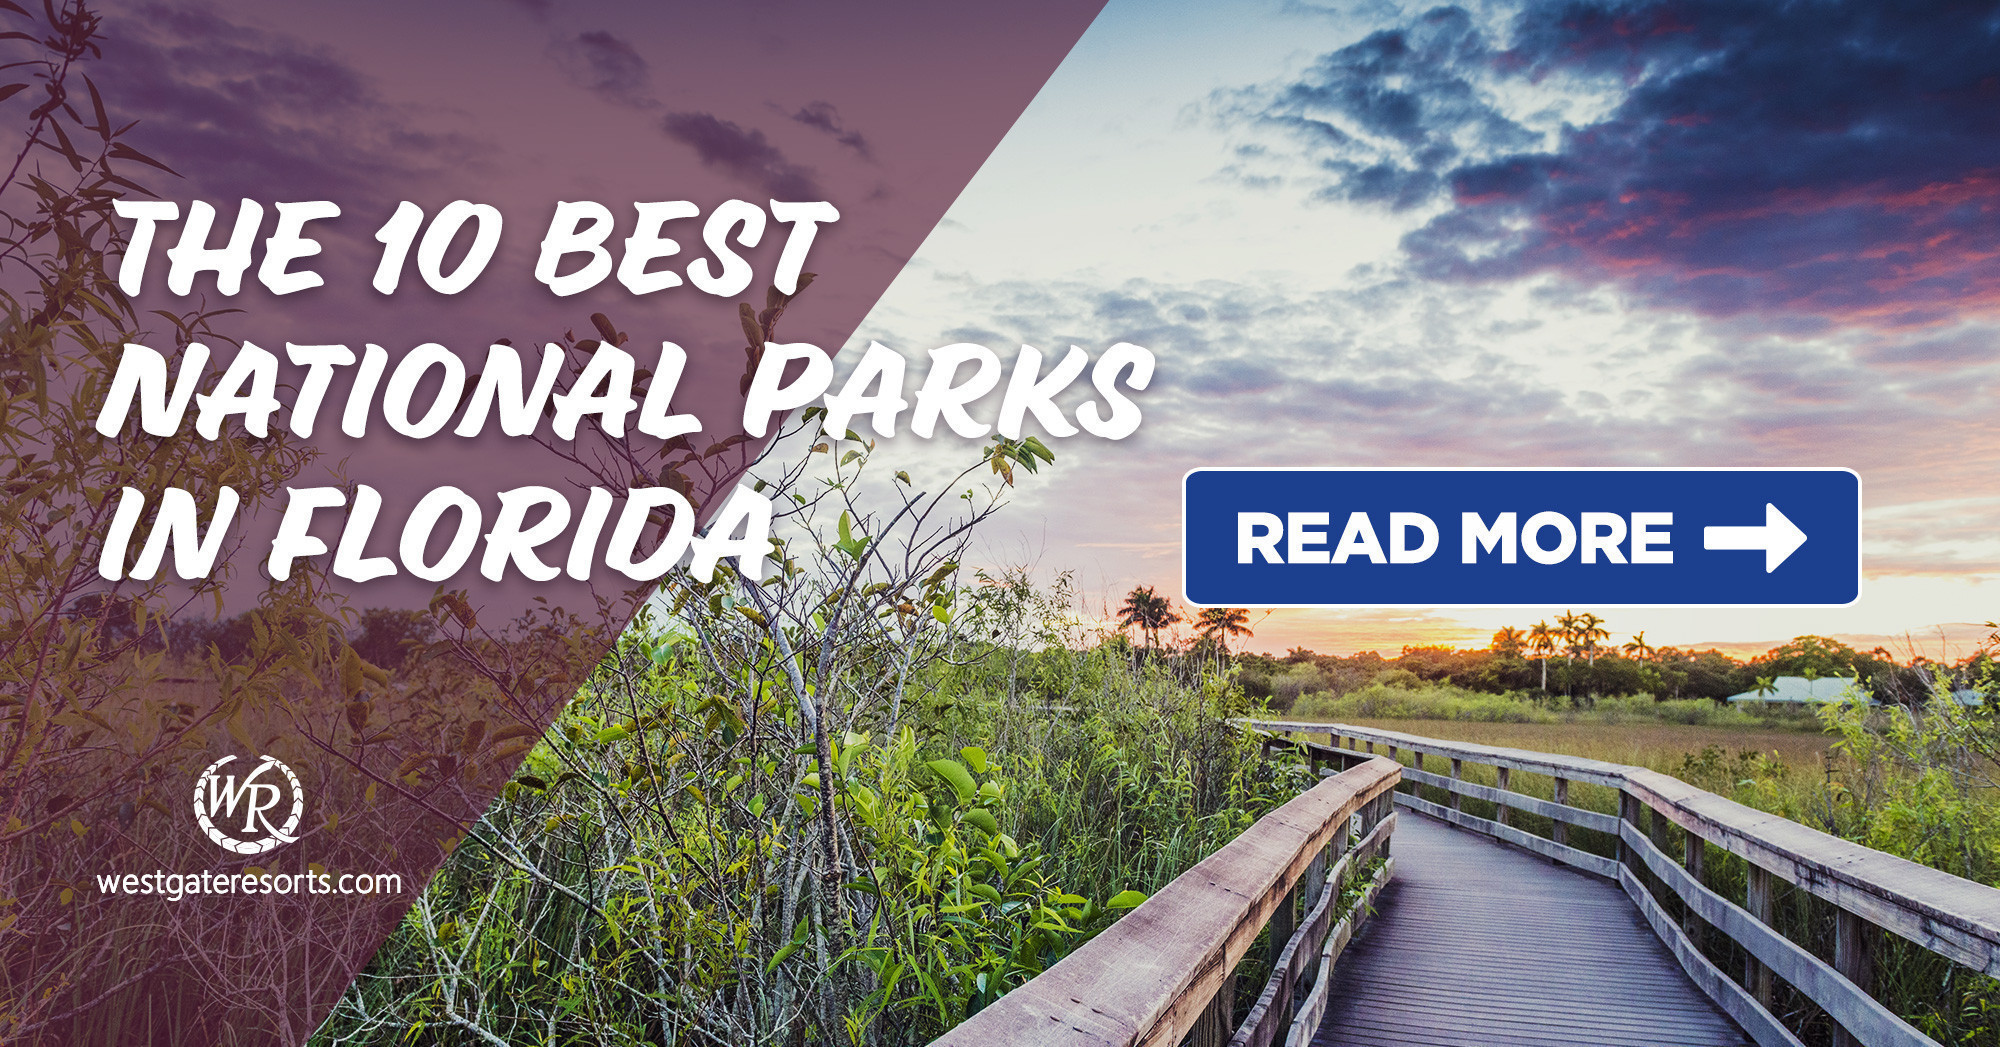 The 10 Best National Parks in Florida